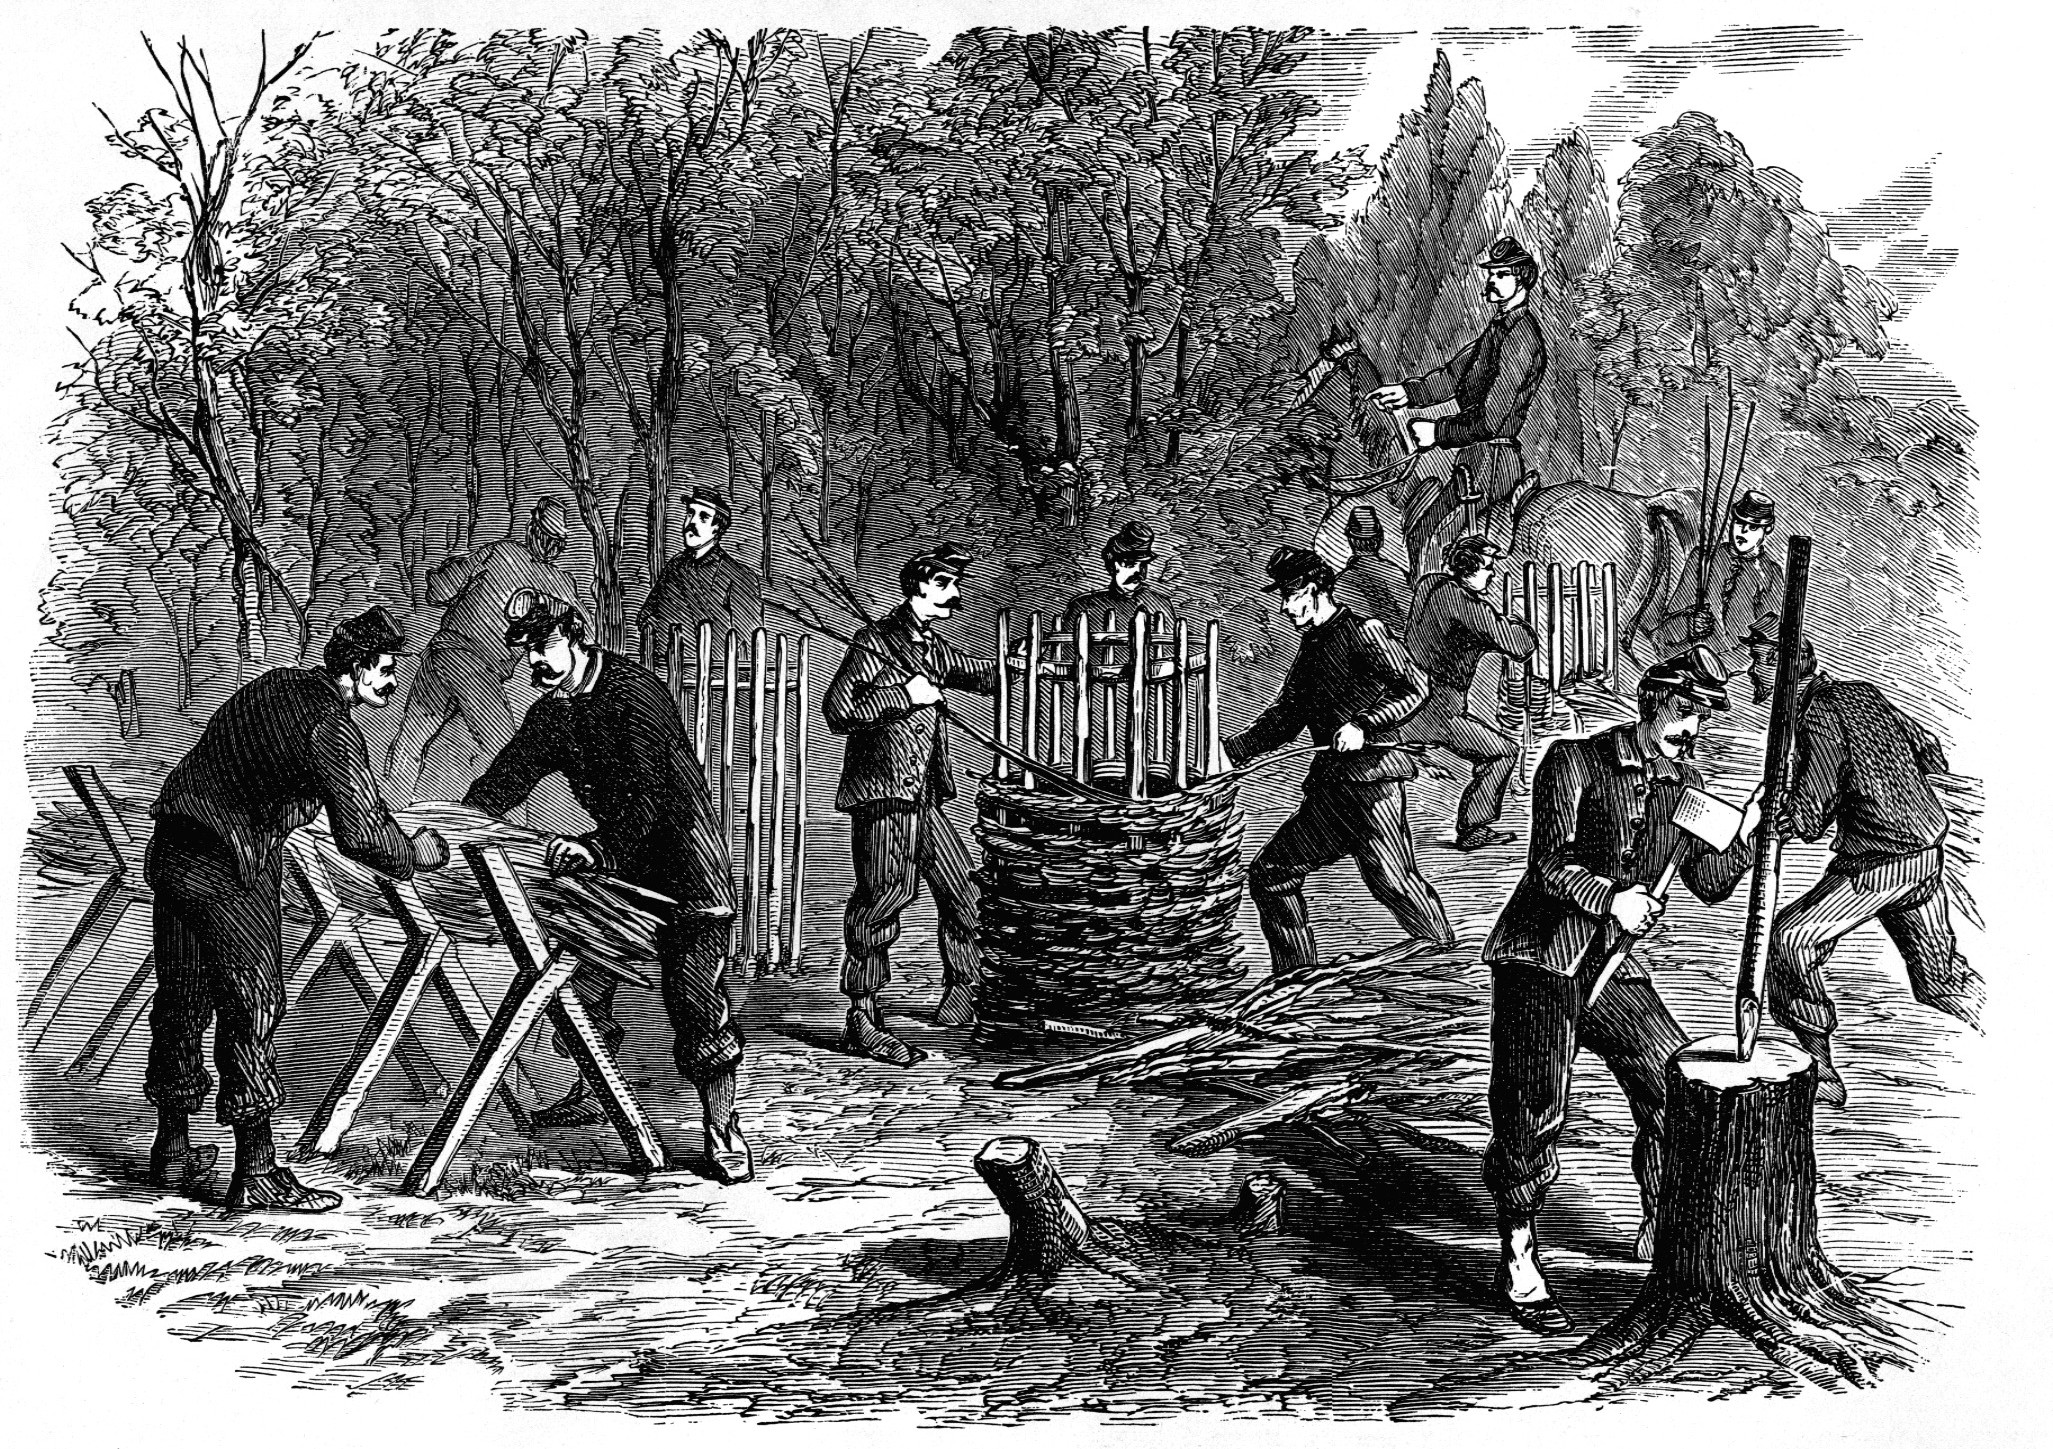 Men of the 77th Pennsylvania Regiment construct fascines and gabions for breastworks.